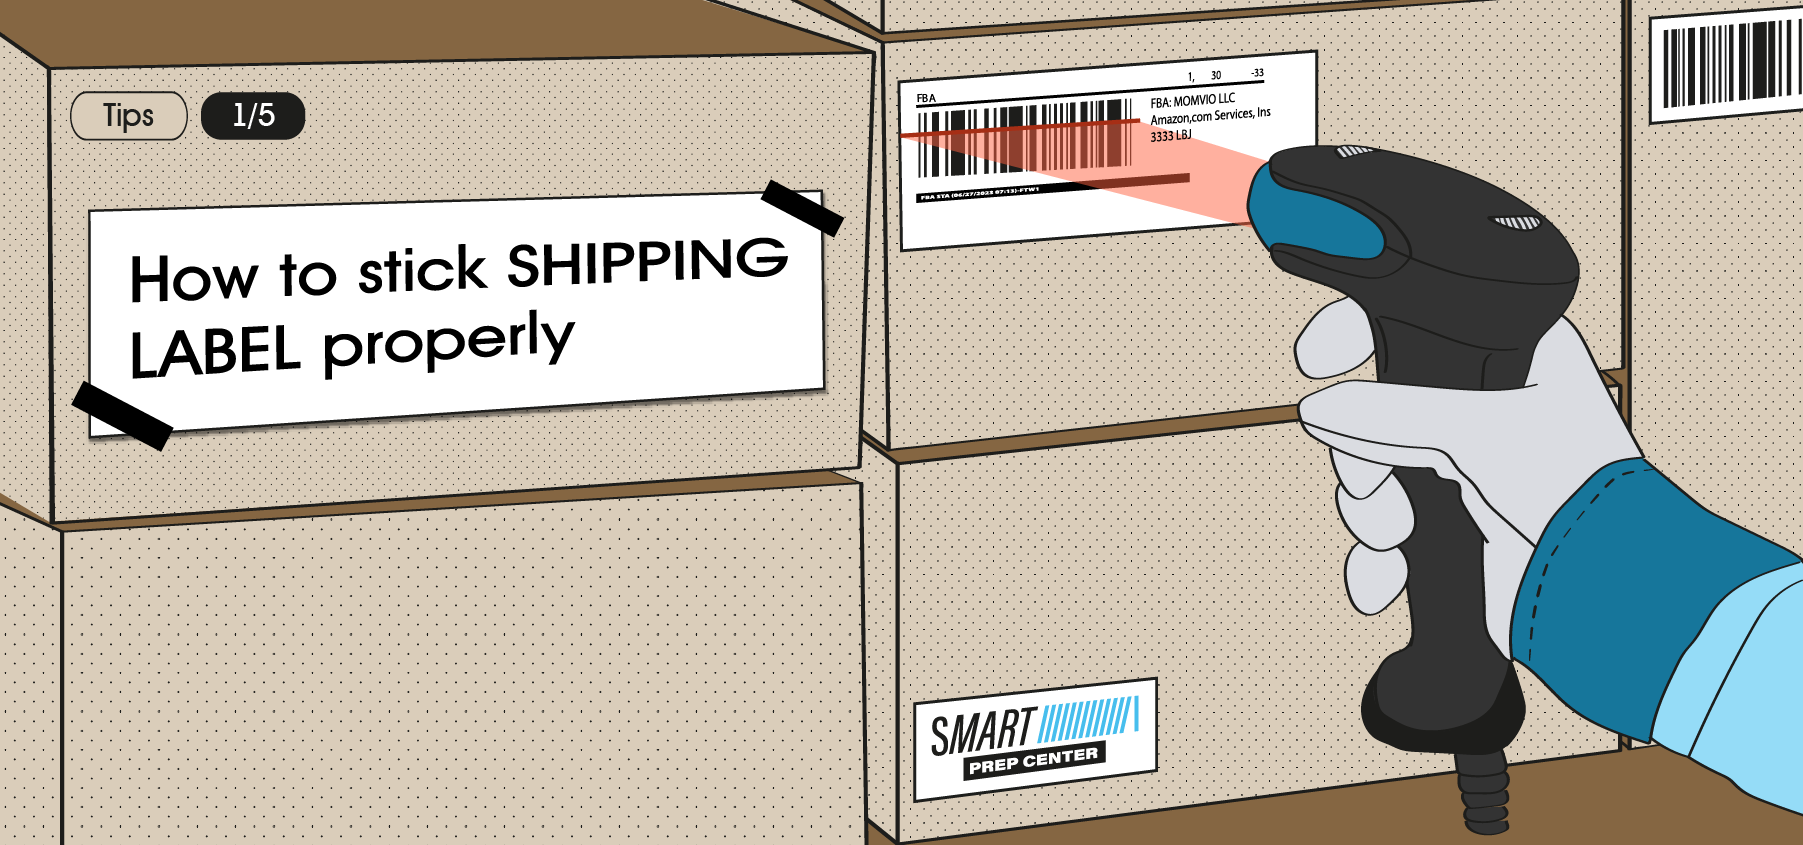 How to stick SHIPPING LABEL properly